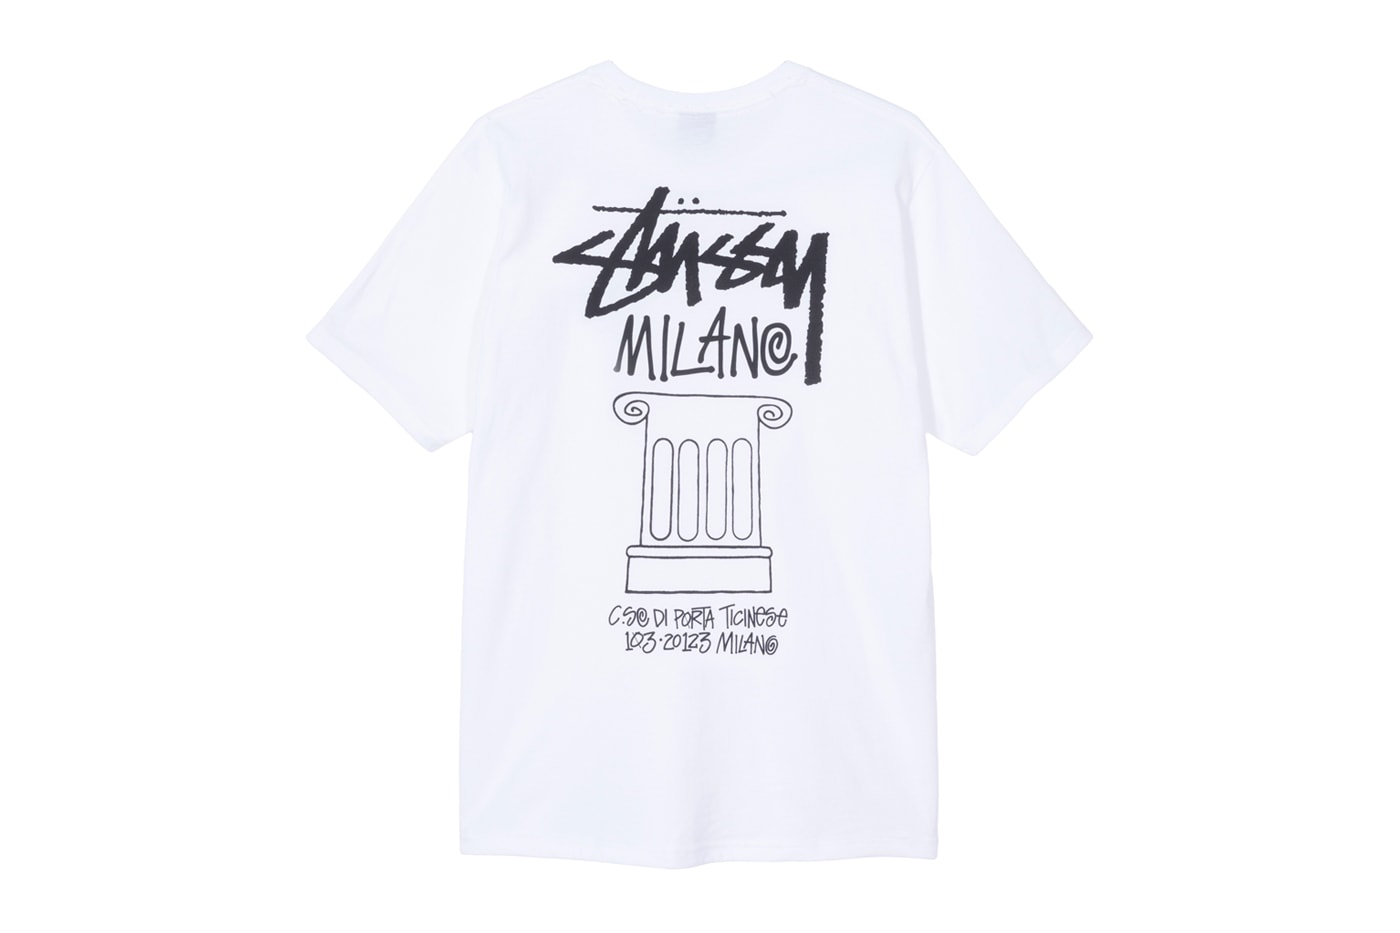 Stussy Milano Open New Chapter Store physical brick and mortar W PA design deconstructed space California Slam Jam Socialism Italy streetwear clothing boutique interior architecture